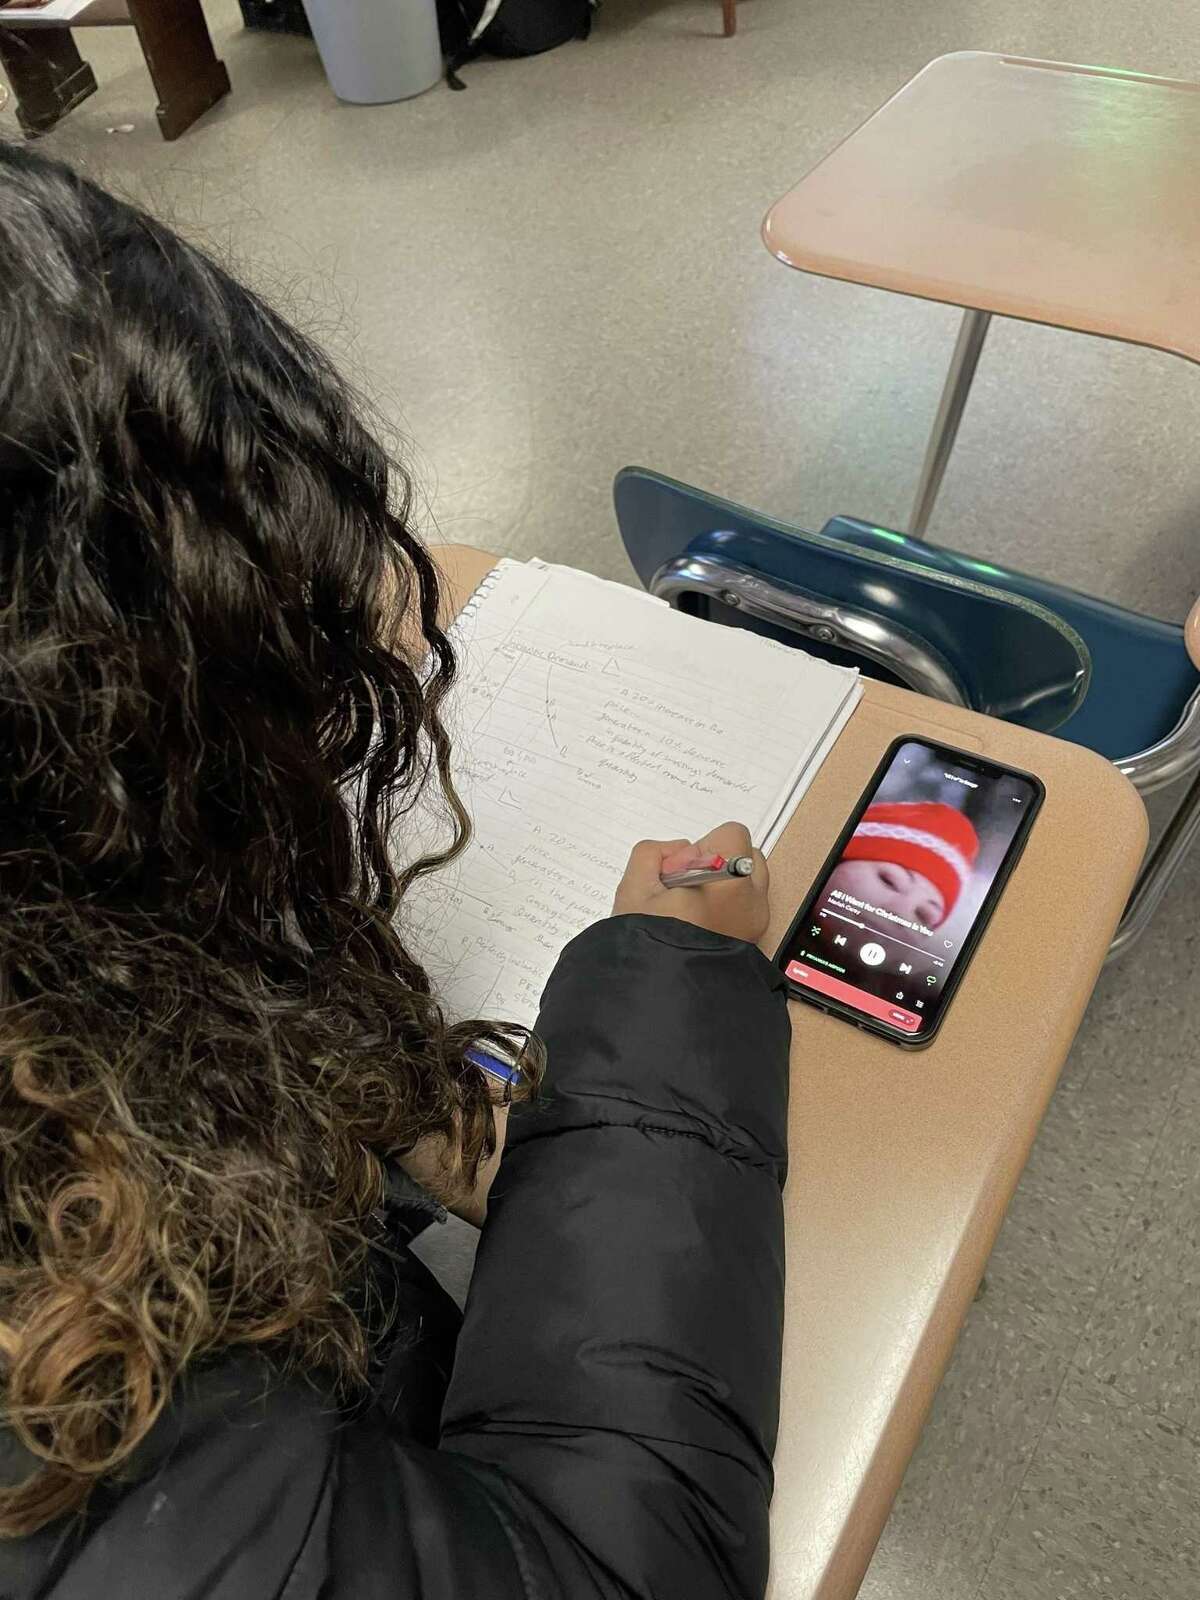 Stamford High School senior Priyanka Umamaheswaran listens to Mariah Carey’s iconic holiday song “All I Want for Christmas Is You” during class.